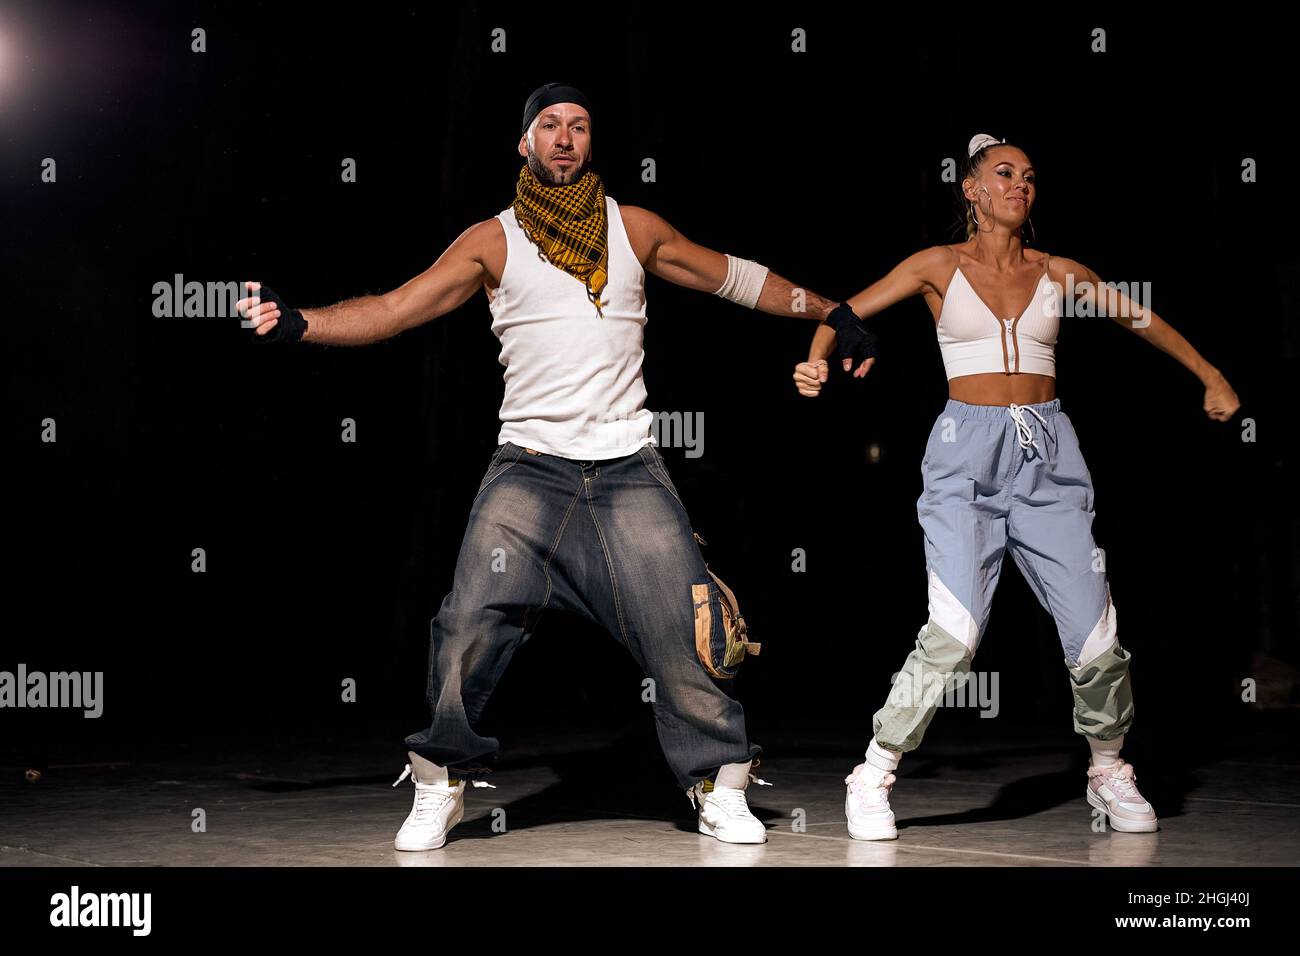 Hip Hop Dance Costumes For Men And Women Modern Stage Dance Wear